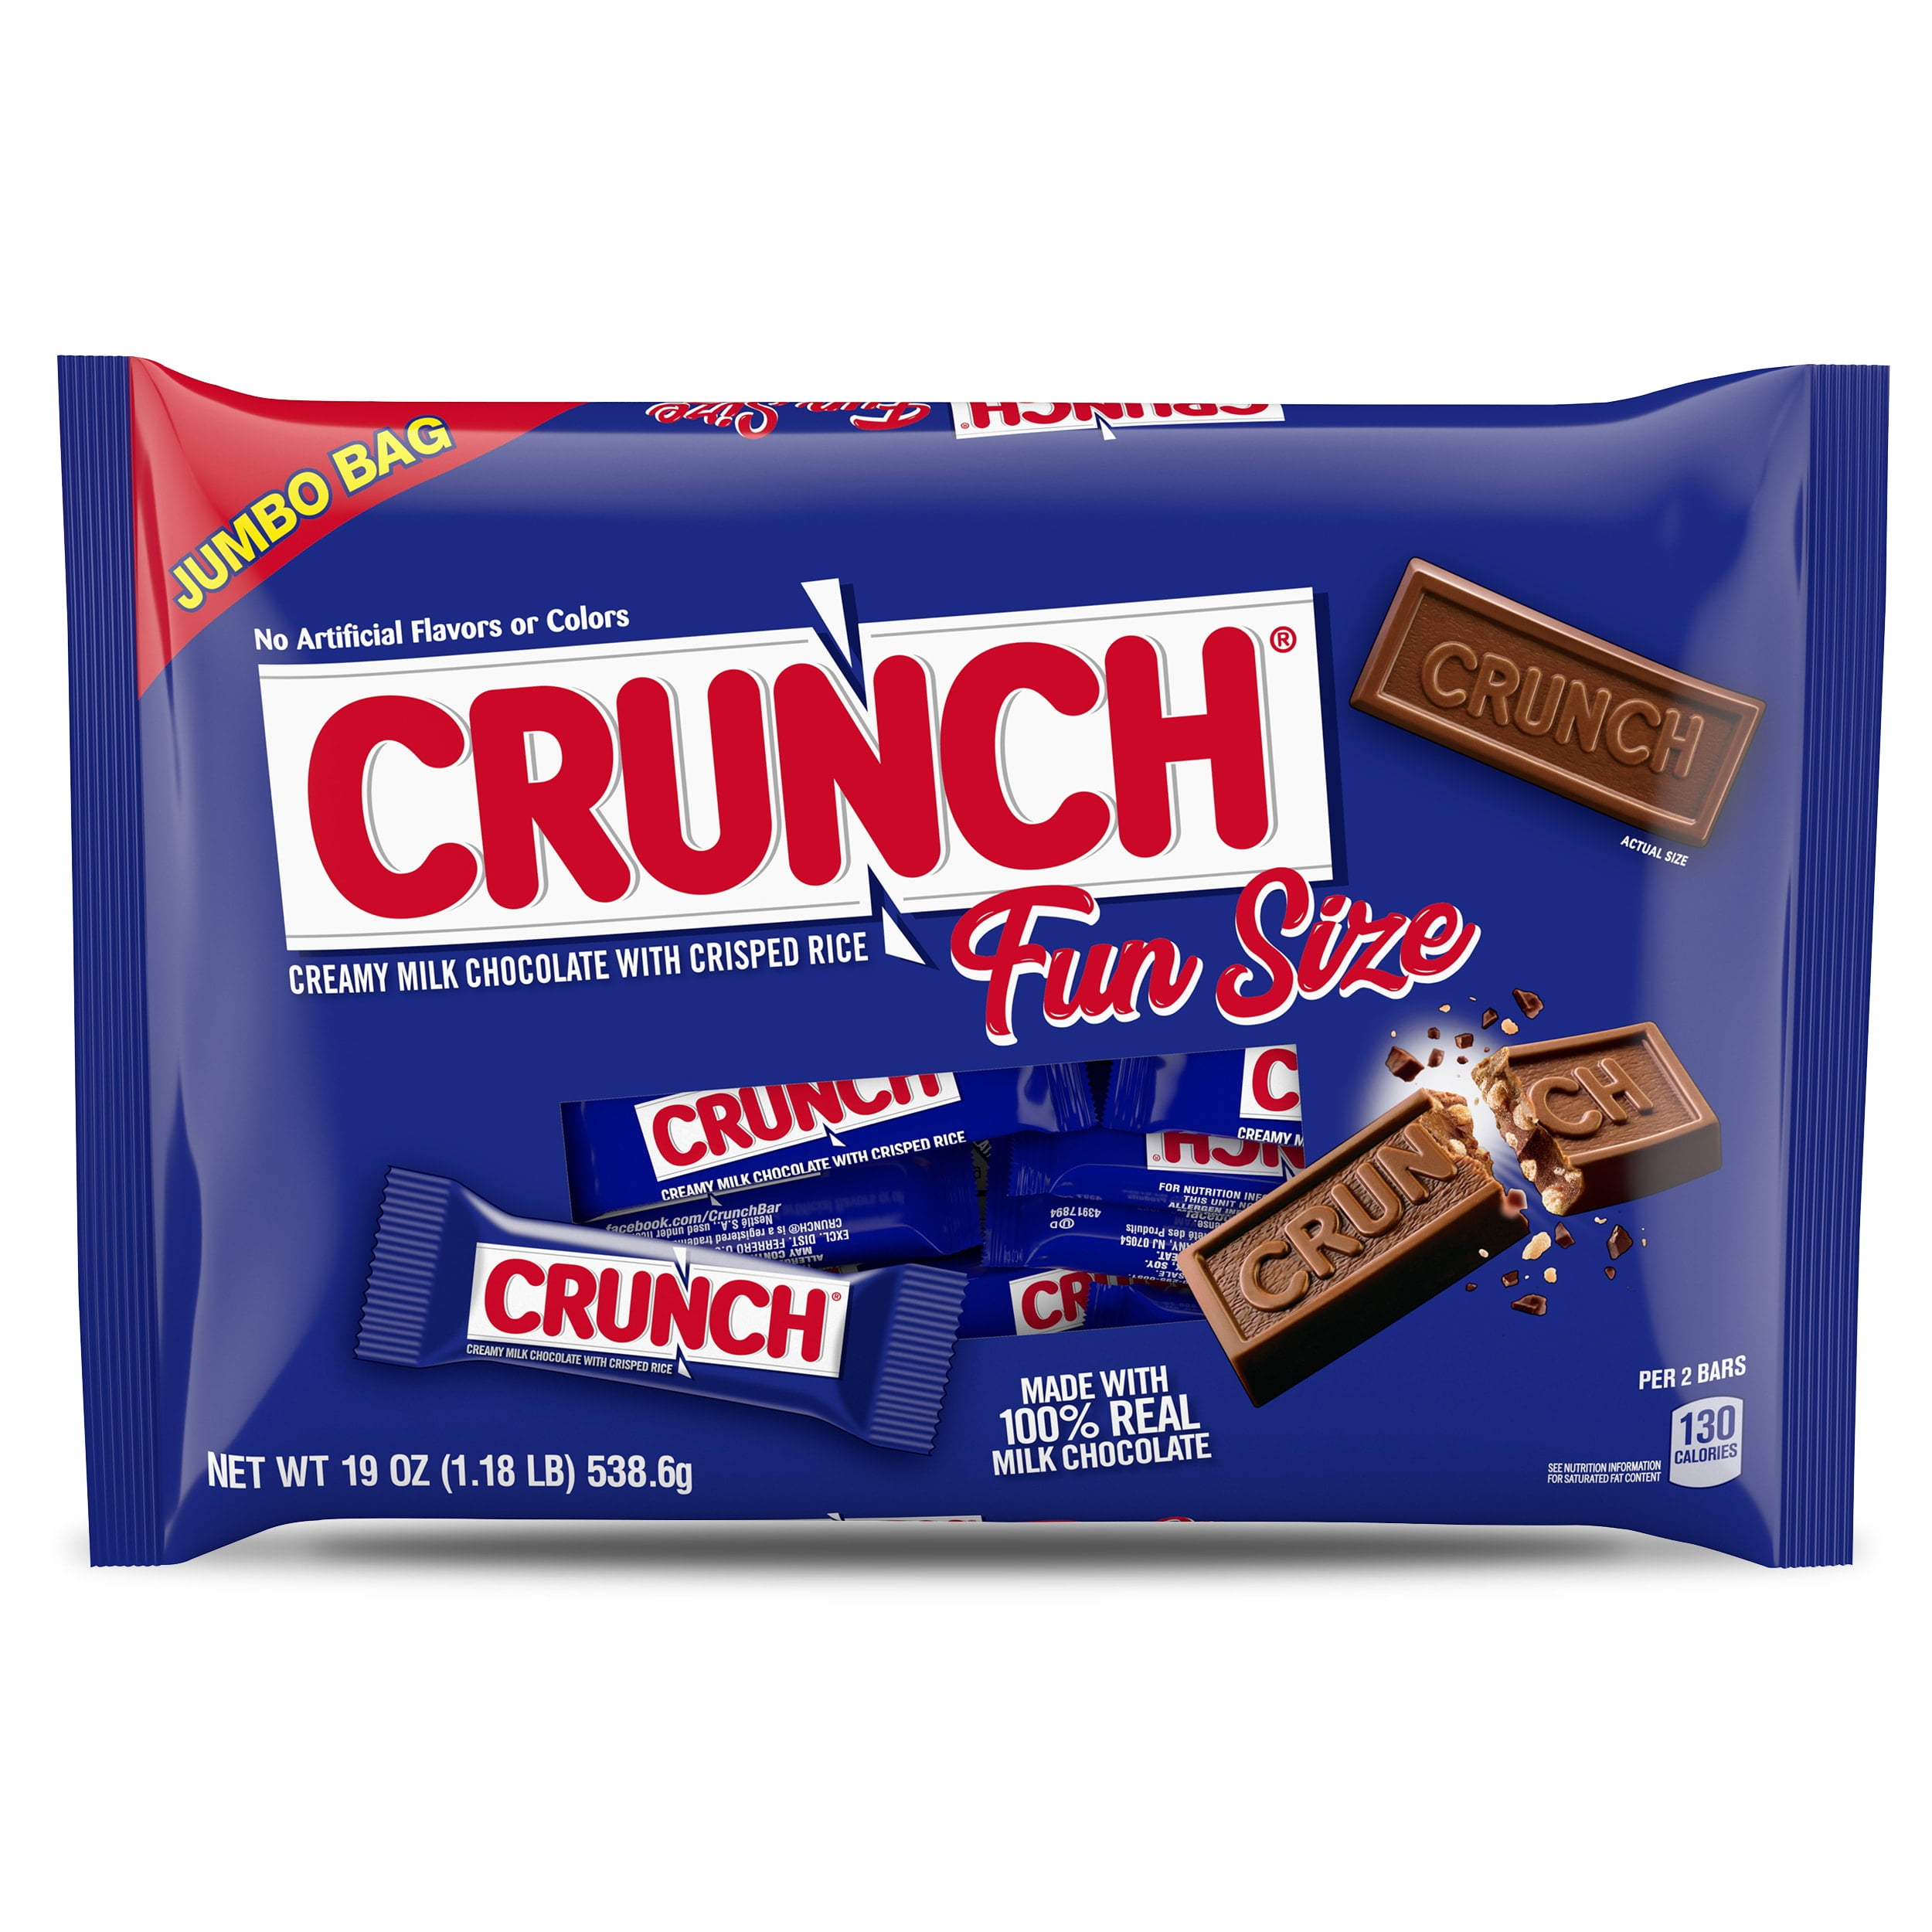 CRUNCH, Fun Size Candy Bars, Trick or Treat Candy, 19 Oz